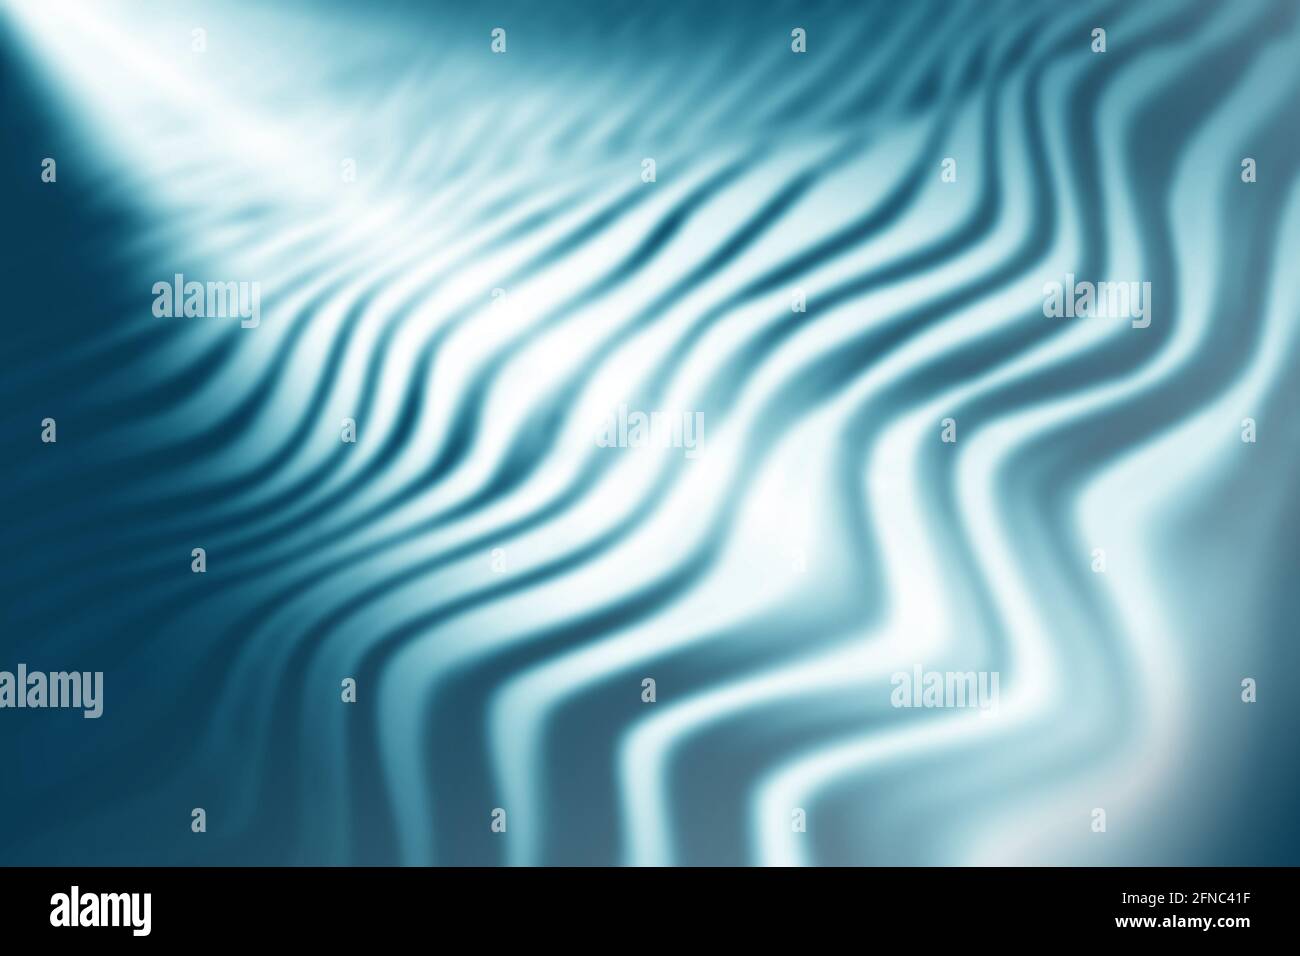 Abstract Blue Blur Background Stock Photo